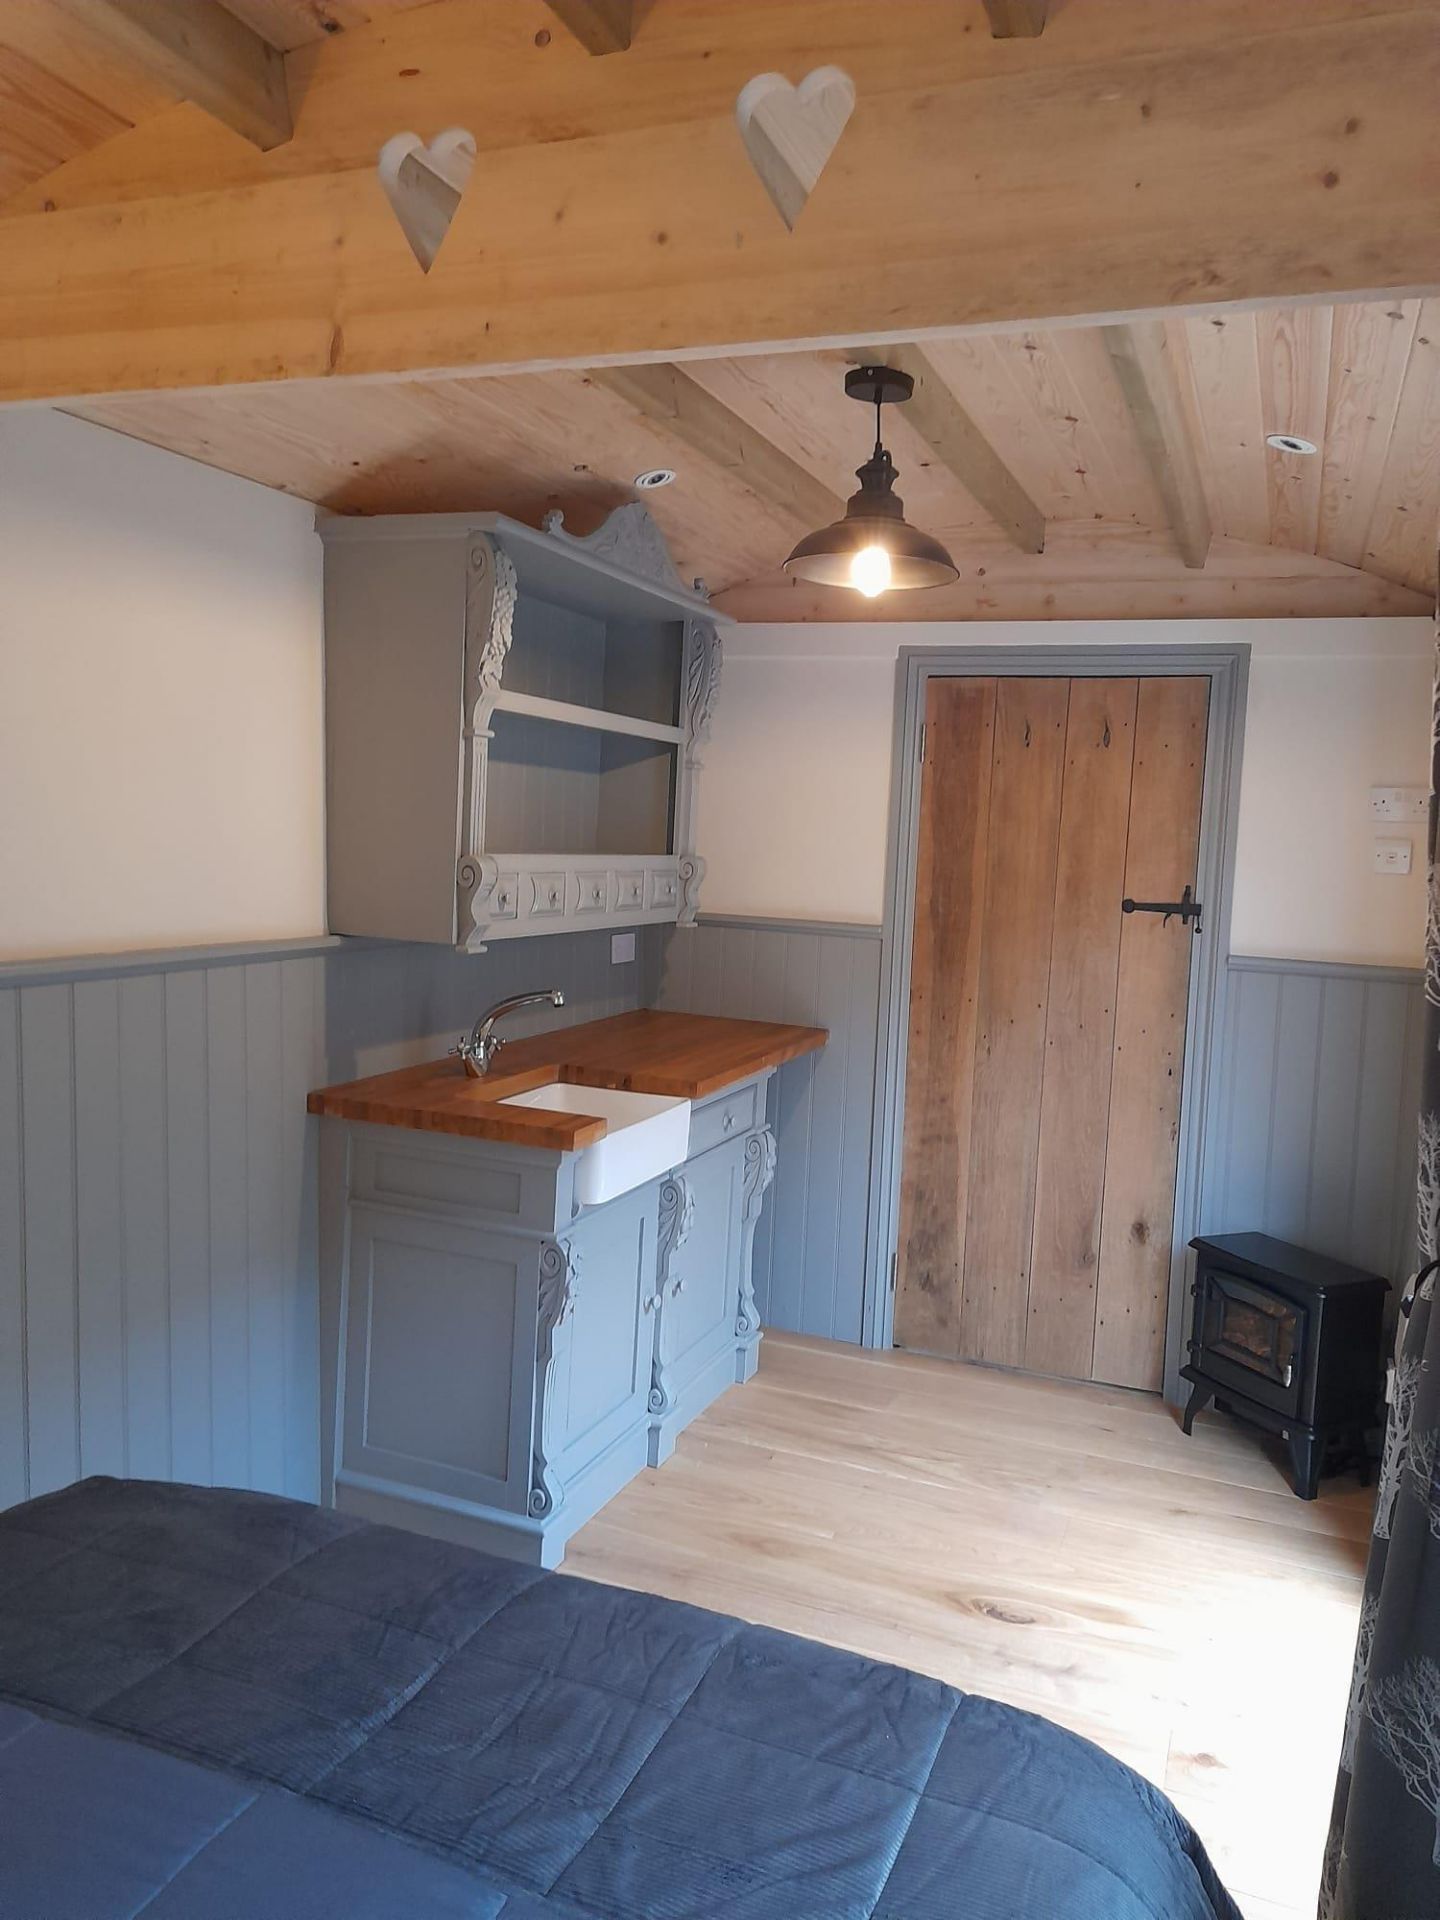 A SHEPHERDS HUT - LUXURIOUS NEW HAND CRAFTED, FULLY FINISHED BUILT FOR ALL YEAR ROUND USE HEAVILY - Image 8 of 13